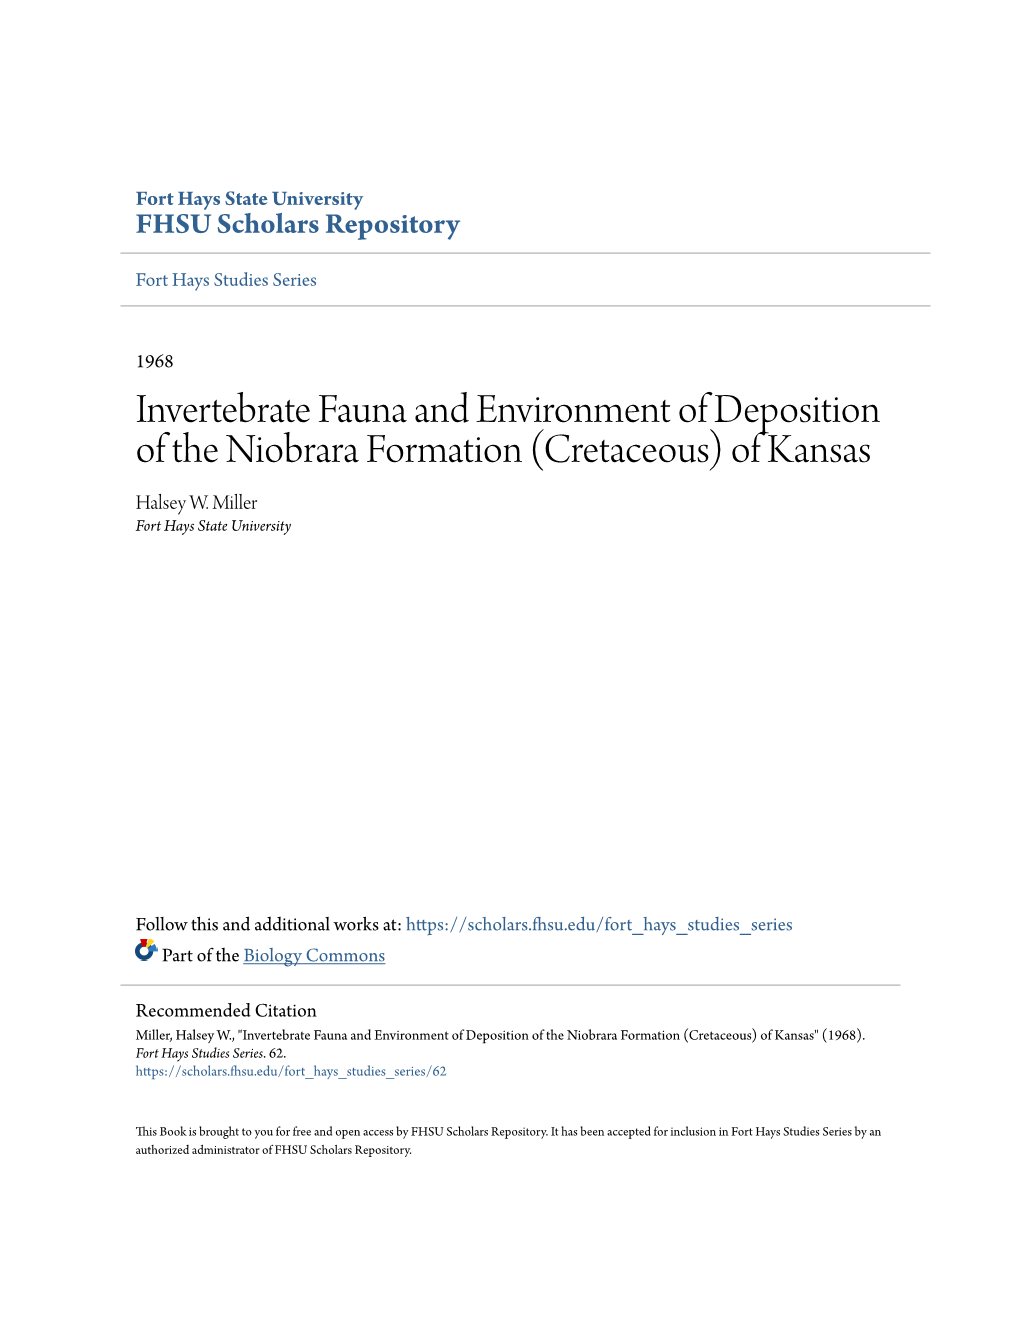 Invertebrate Fauna and Environment of Deposition of the Niobrara Formation (Cretaceous) of Kansas Halsey W